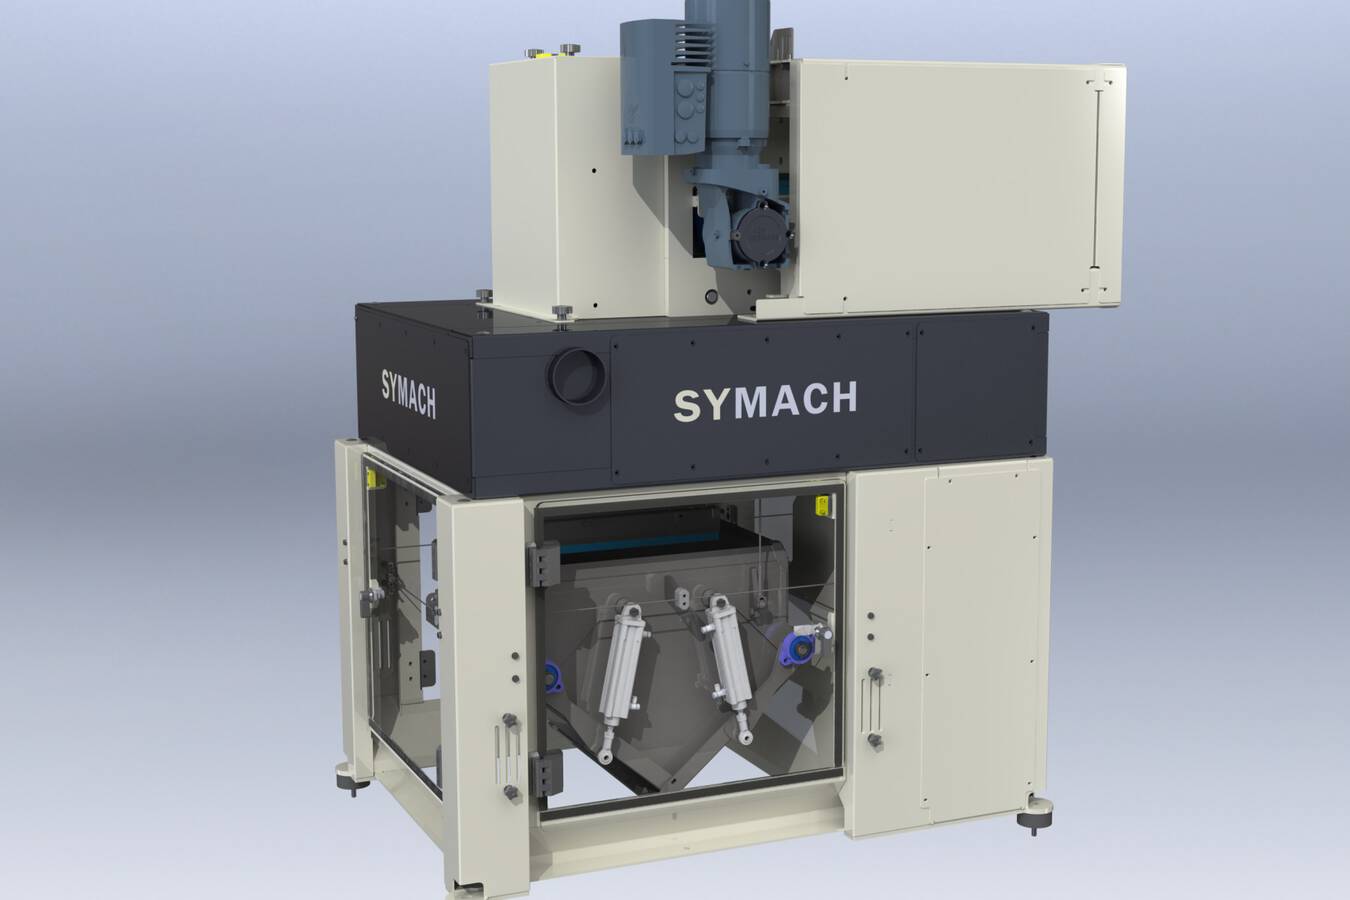 SYMACH designs, manufactures, and integrates its own weight dosing systems